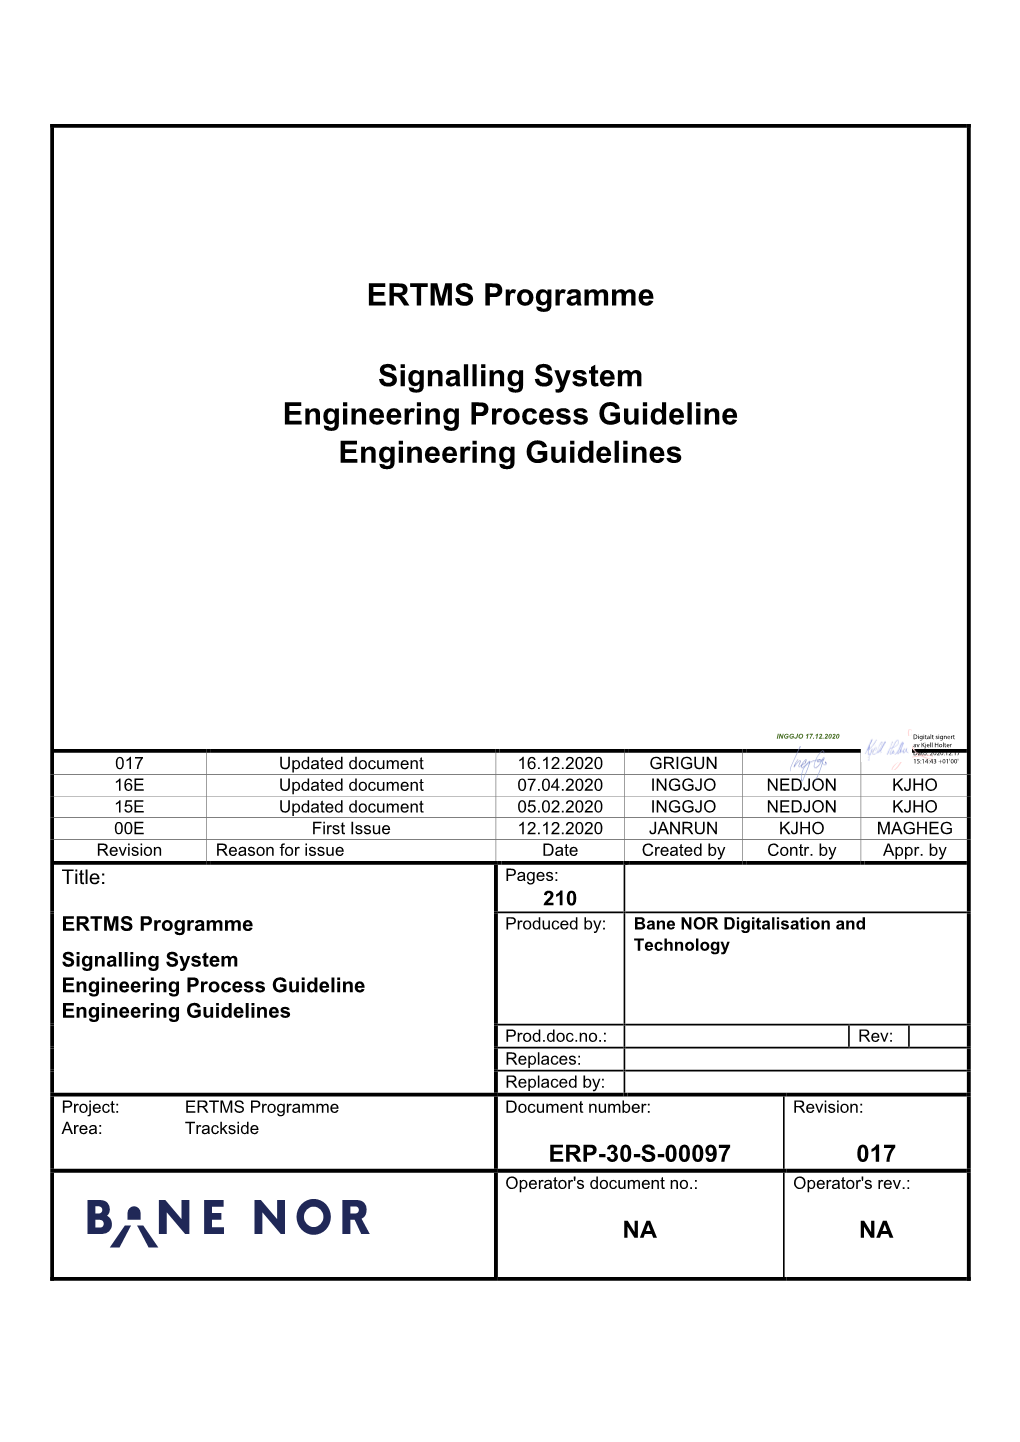 ERTMS Programme Signalling System Engineering Process Guideline Engineering Guidelines